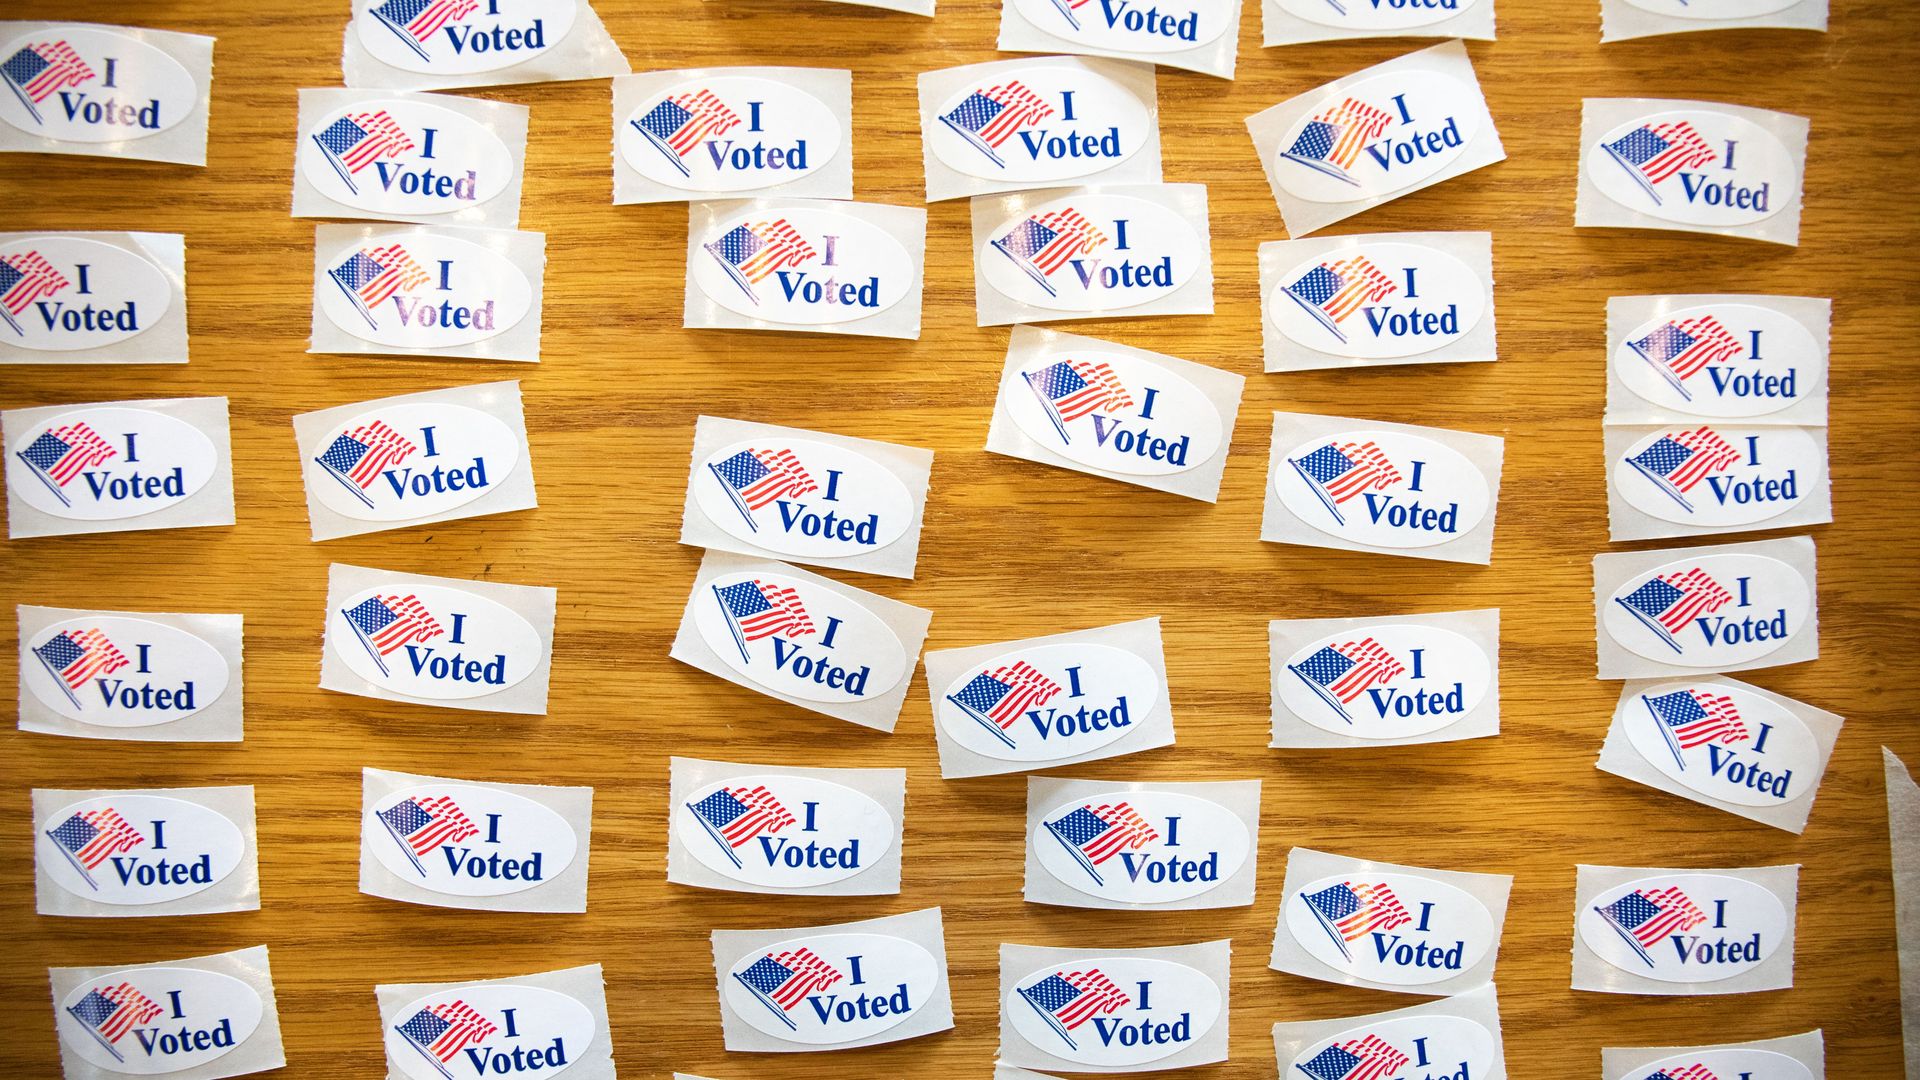 In this image, rows of "I voted" stickers are laid out on a table.